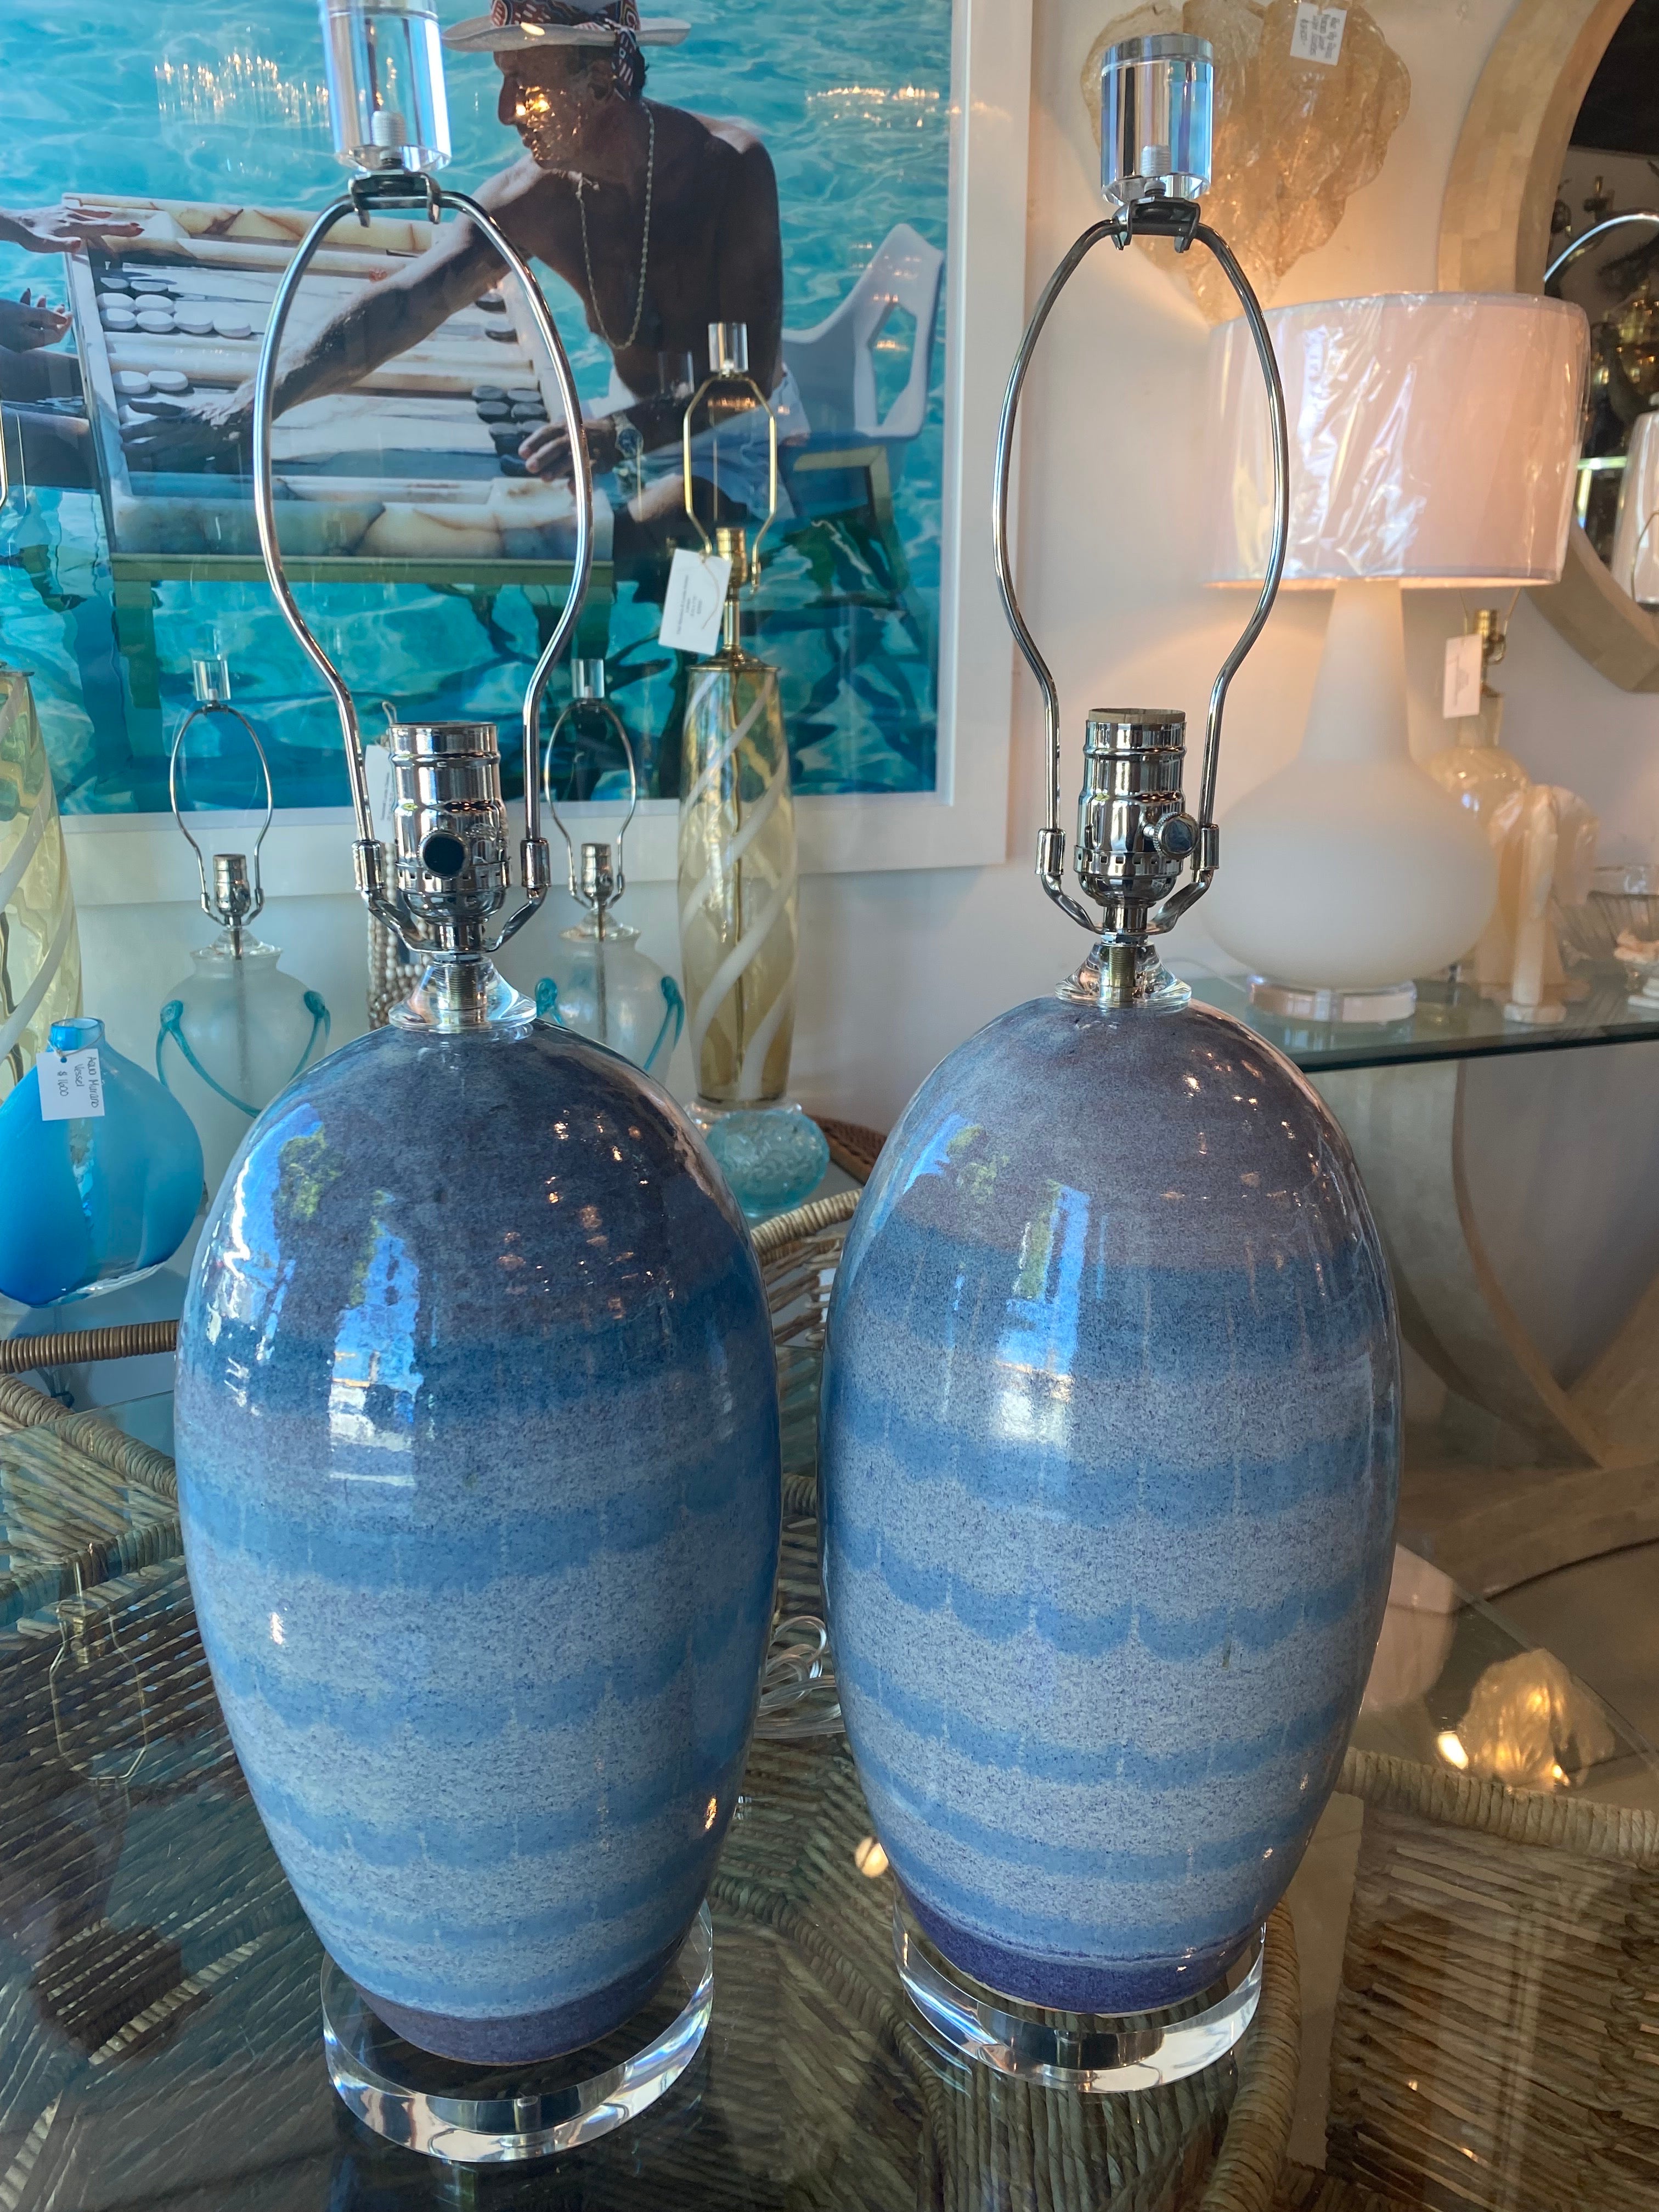 Vintage pair of ceramic pottery table lamps, ombre blue and lavender. Restored to perfection with all new 3 way sockets, all new nickel hardware, lucite base, lucite finials and lucite vase cap. Dimensions: 18 H to socket x 25.5 H to finial x 8 D.